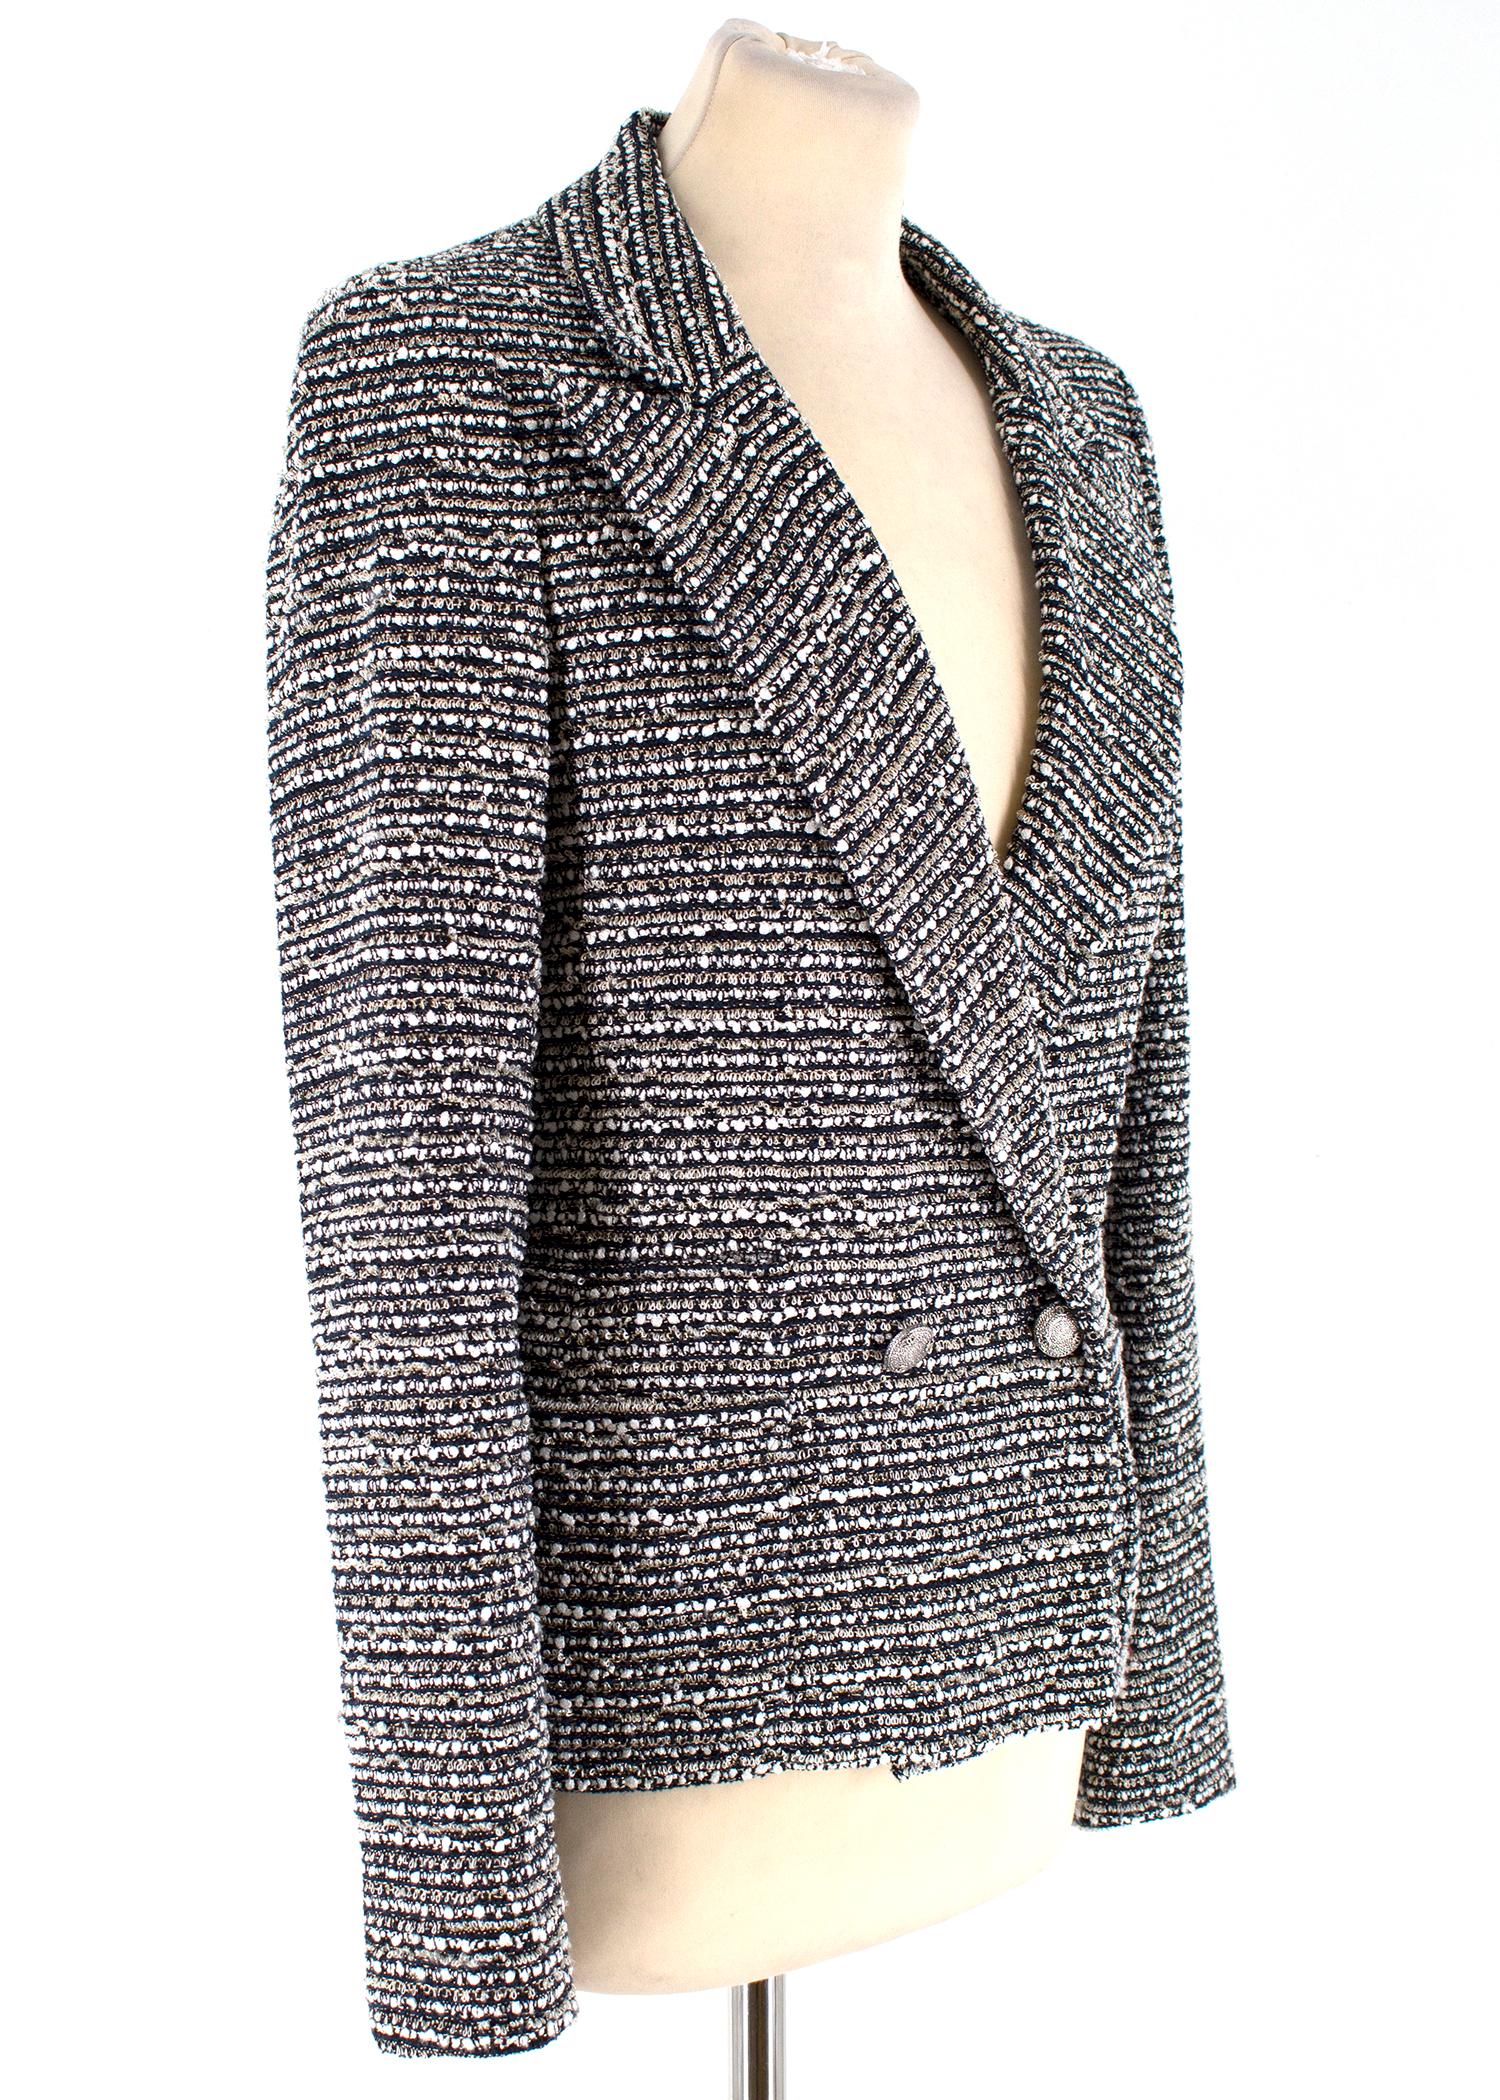 Chanel Black and White Tweed Jacket

-Tweed jacket with silver tone button closure
-Two front pockets
-Notched lapels
-Shoulder pads

Please note, these items are pre-owned and may show signs of being stored even when unworn and unused. This is